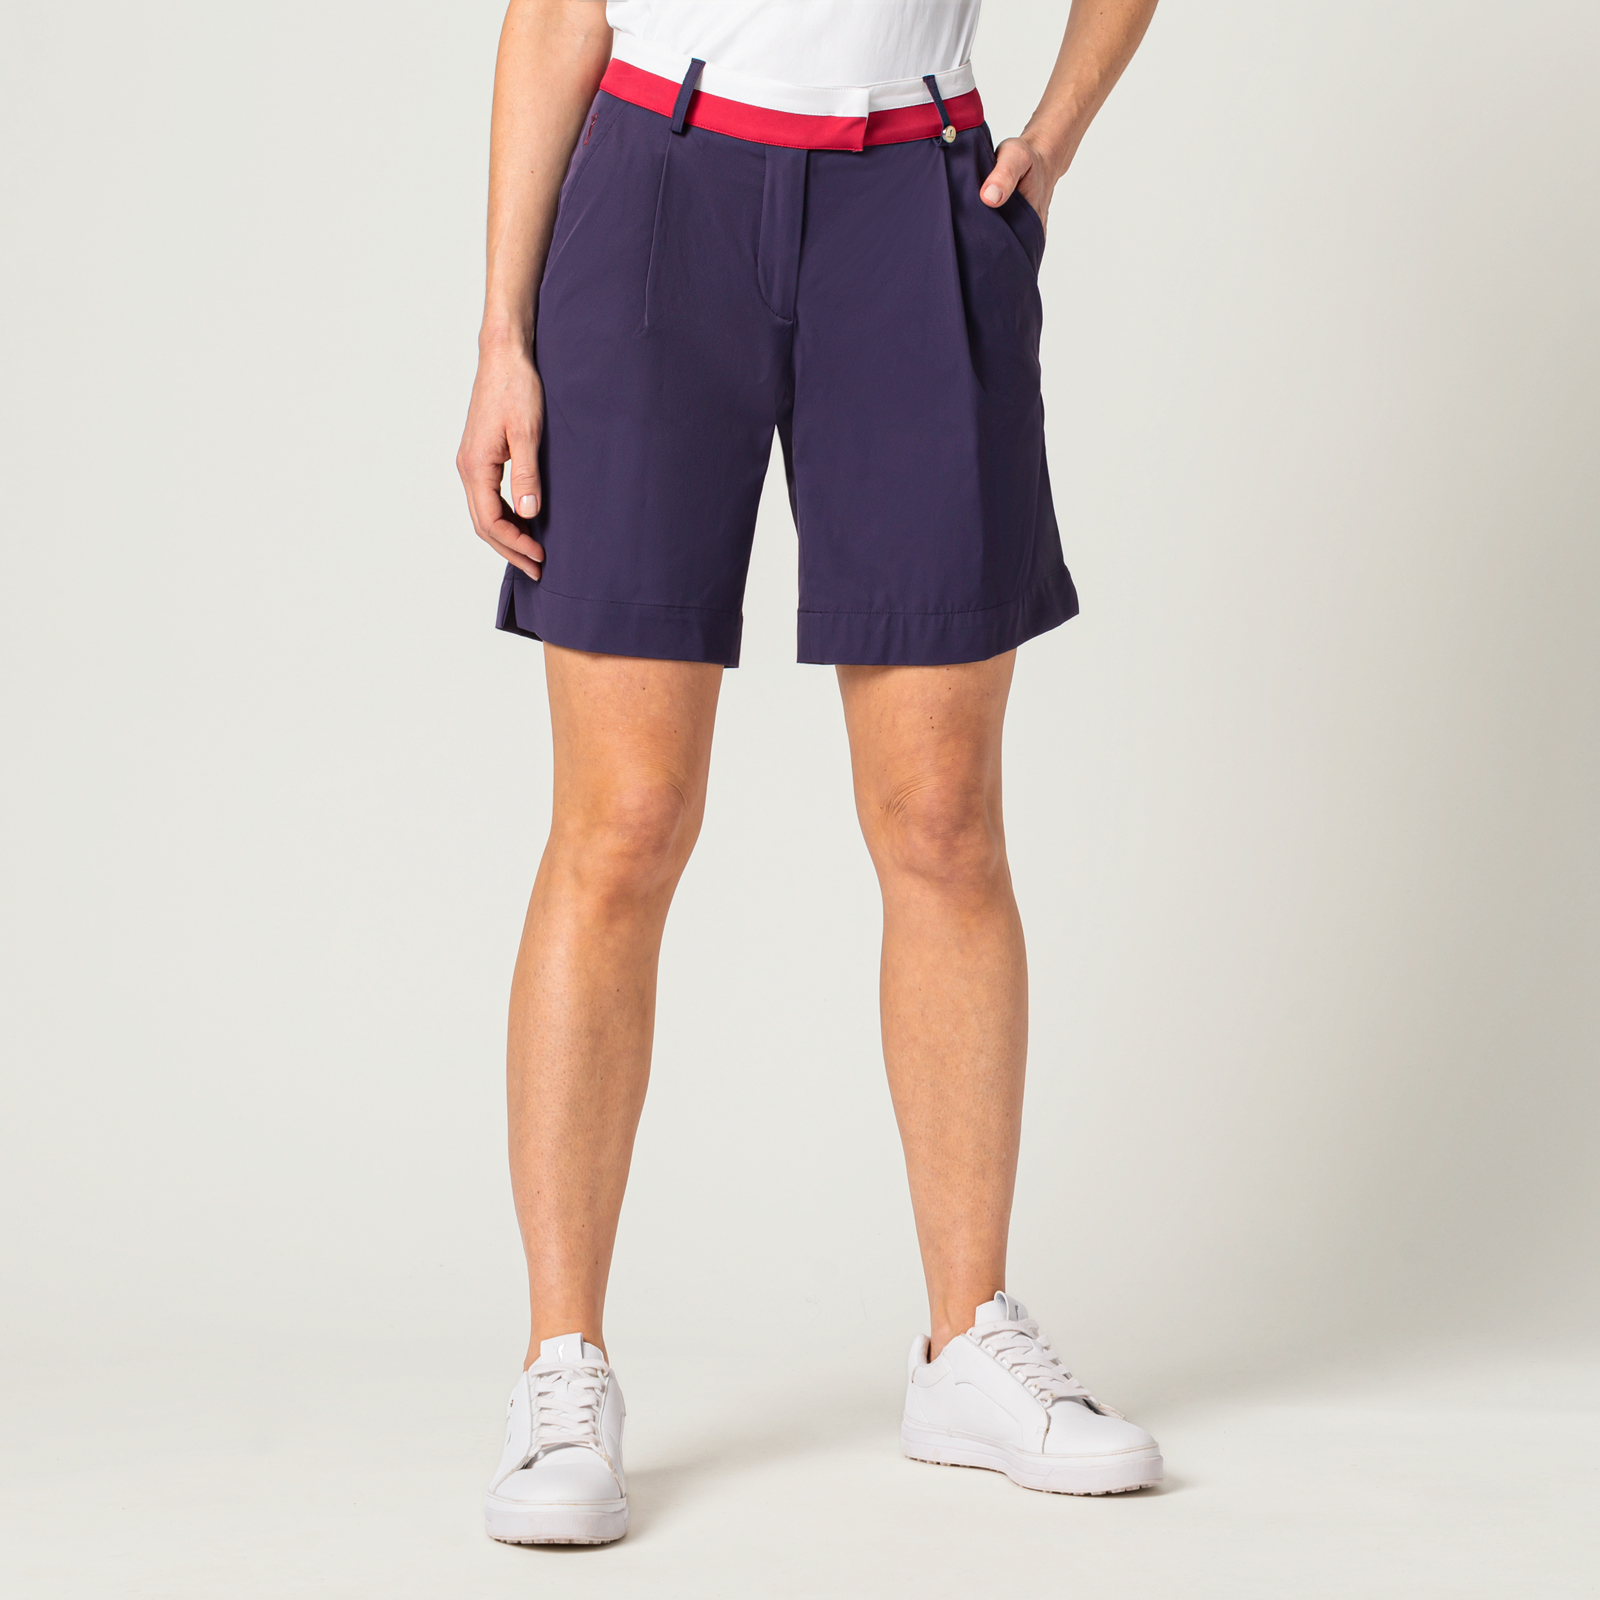 Ladies' Bermuda-style golf shorts with pleated waistband and sun protection 